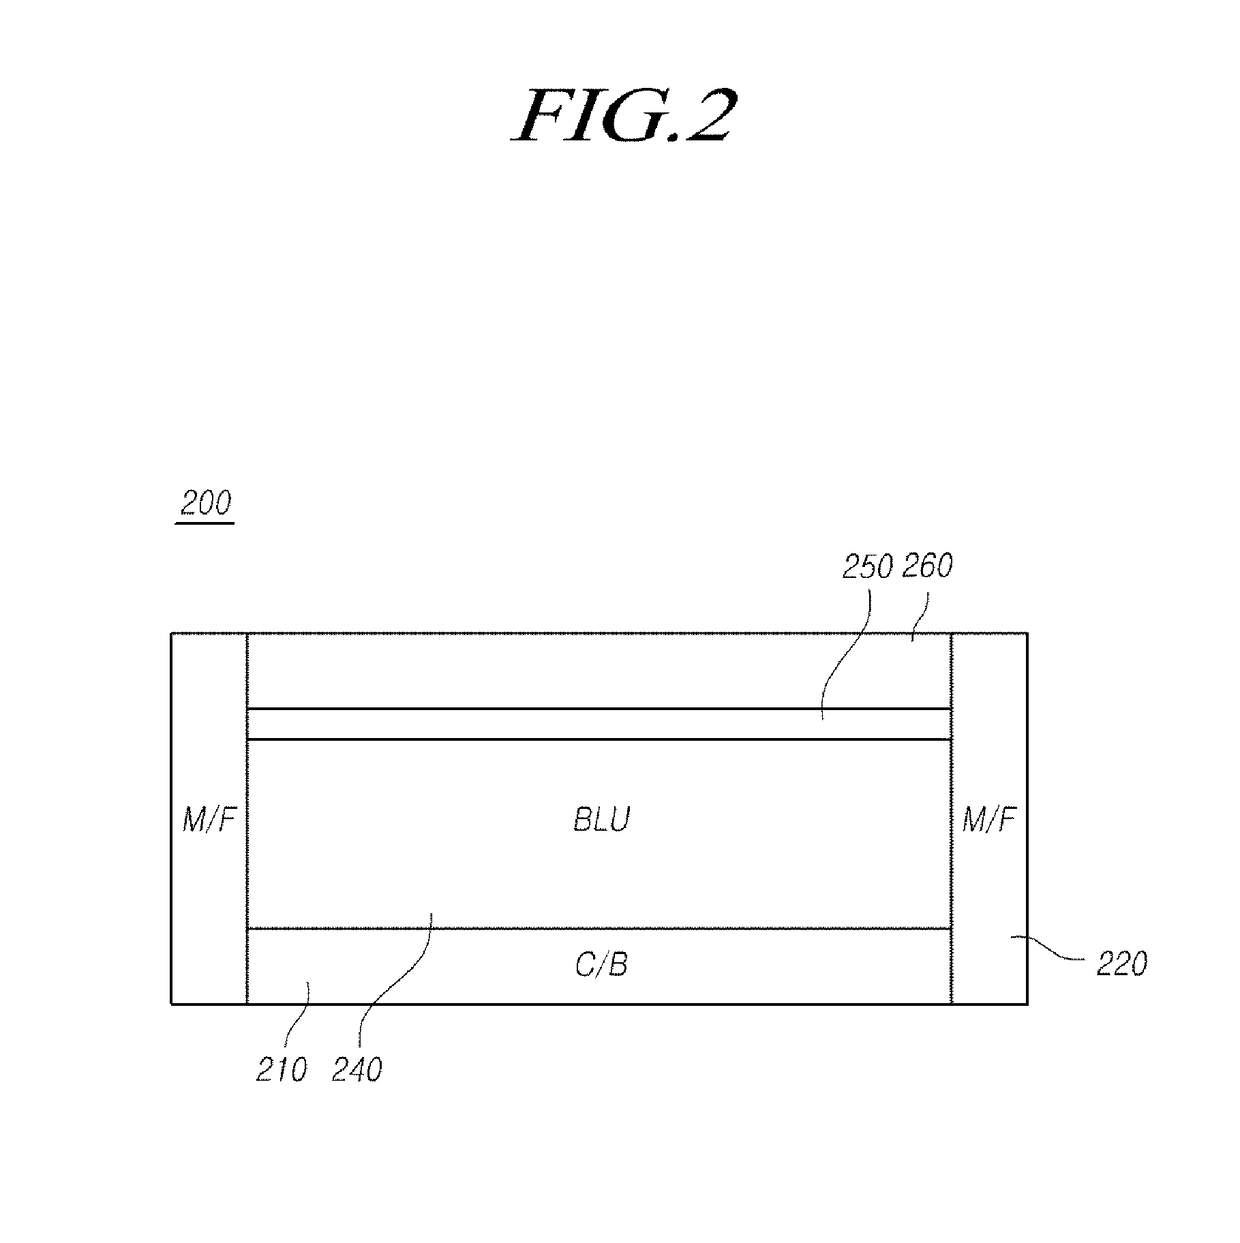 Liquid crystal display device comprising a screw-shaped combining member affixing a middle frame to a cover bottom through a first groove of a contacting portion